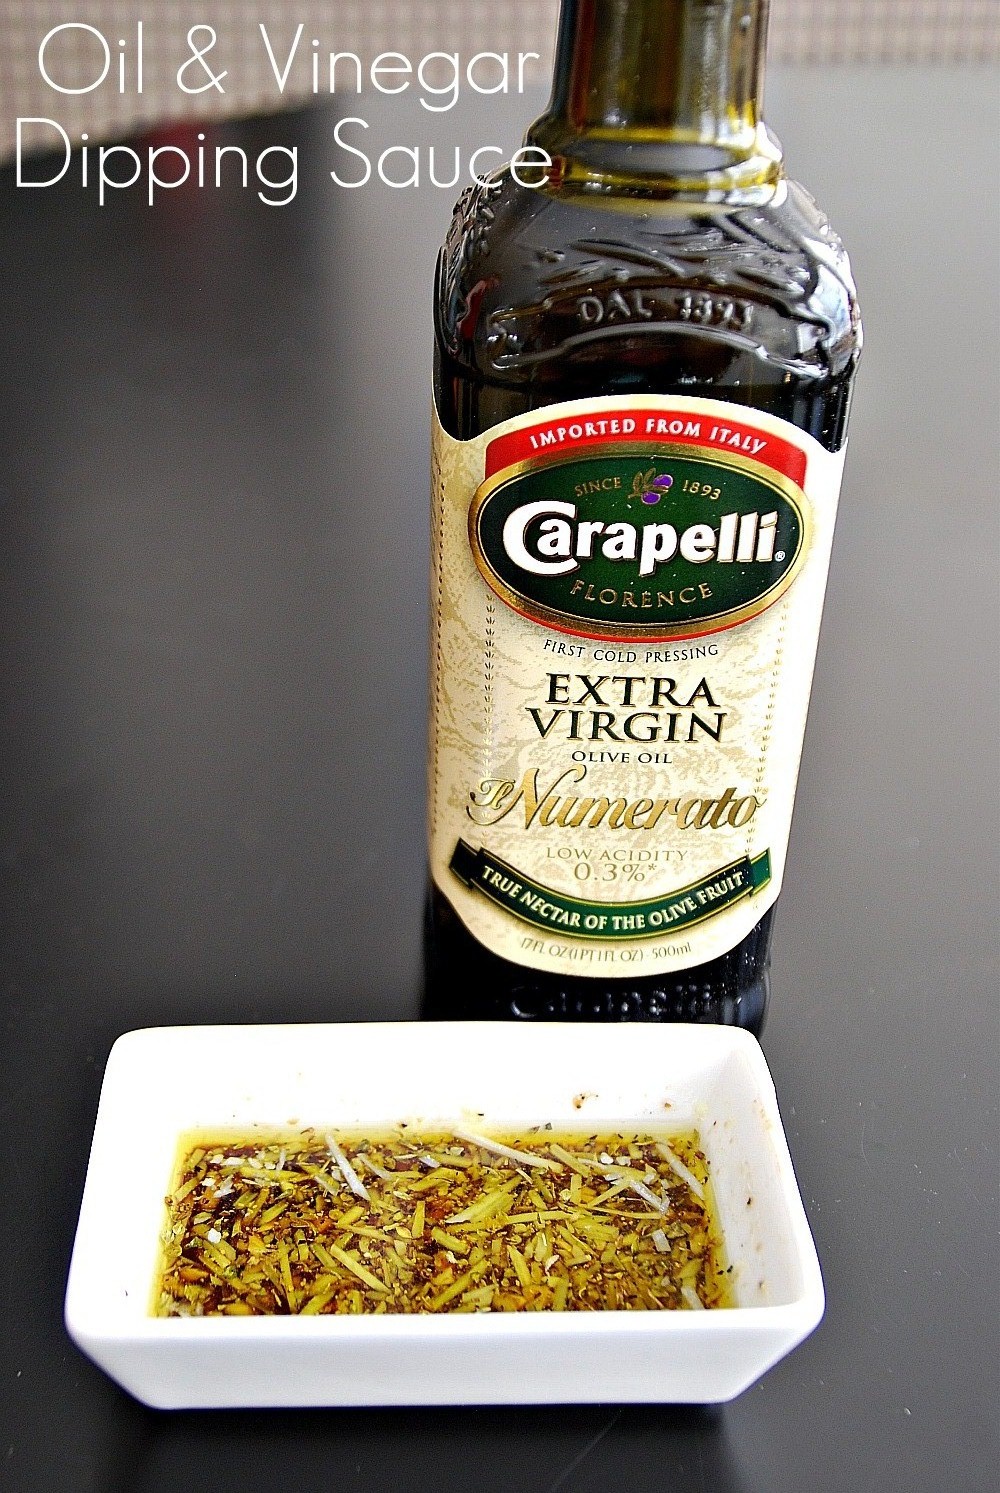 Oil and Vinegar Dipping Sauce